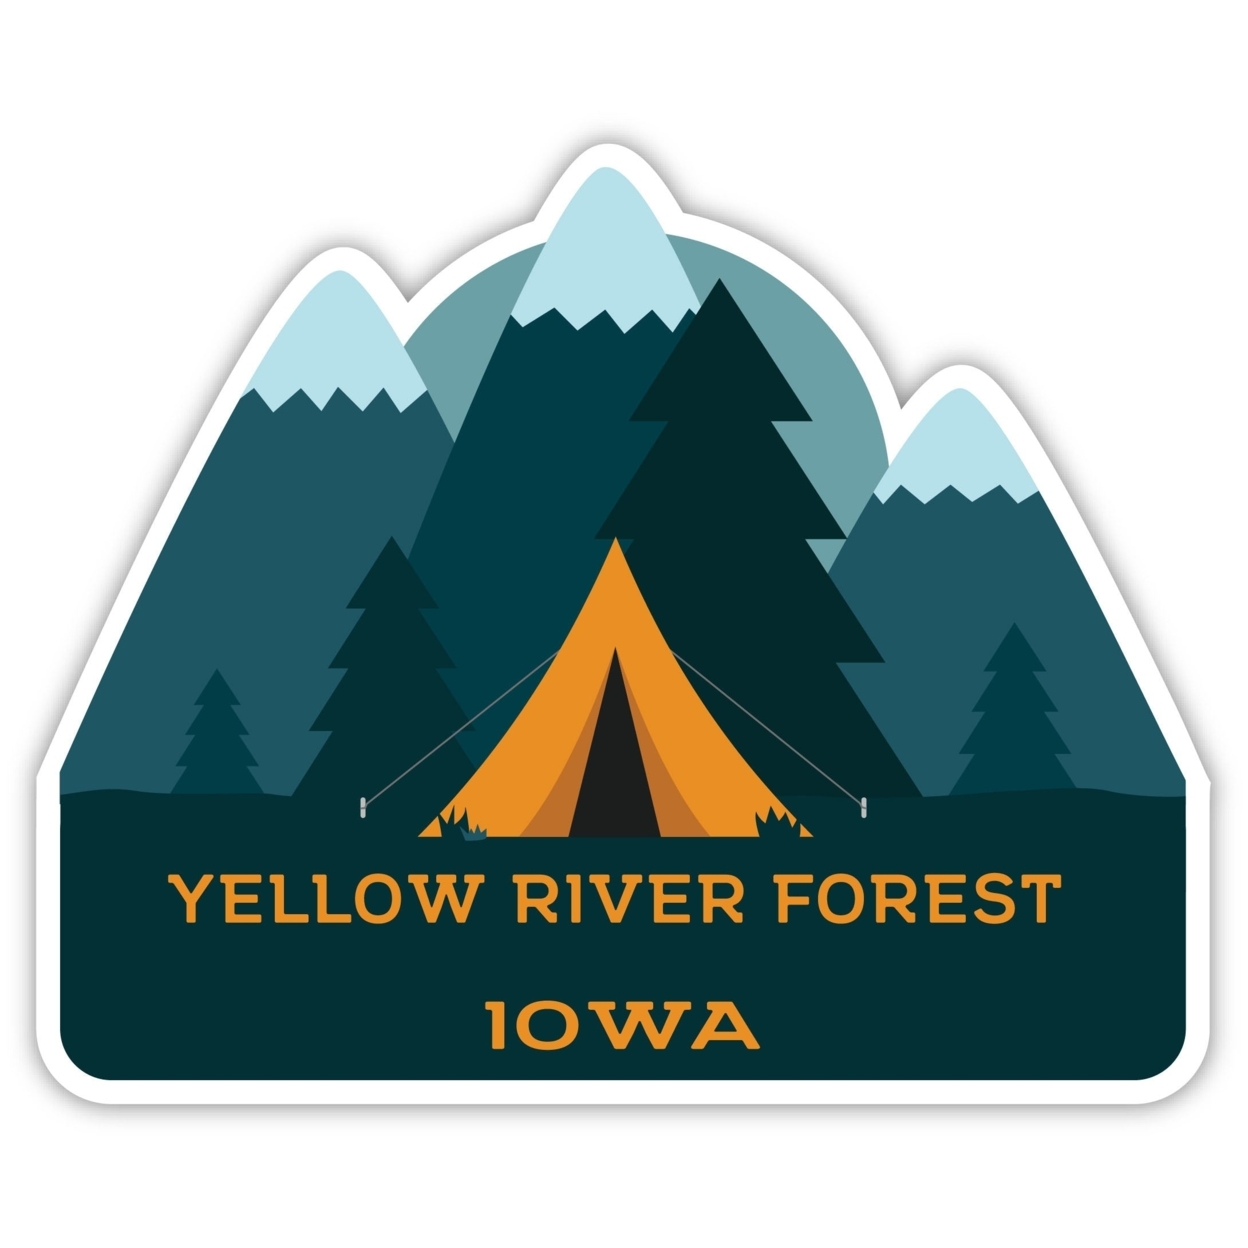 Yellow River Forest Iowa Souvenir Decorative Stickers (Choose Theme And Size) - Single Unit, 2-Inch, Tent